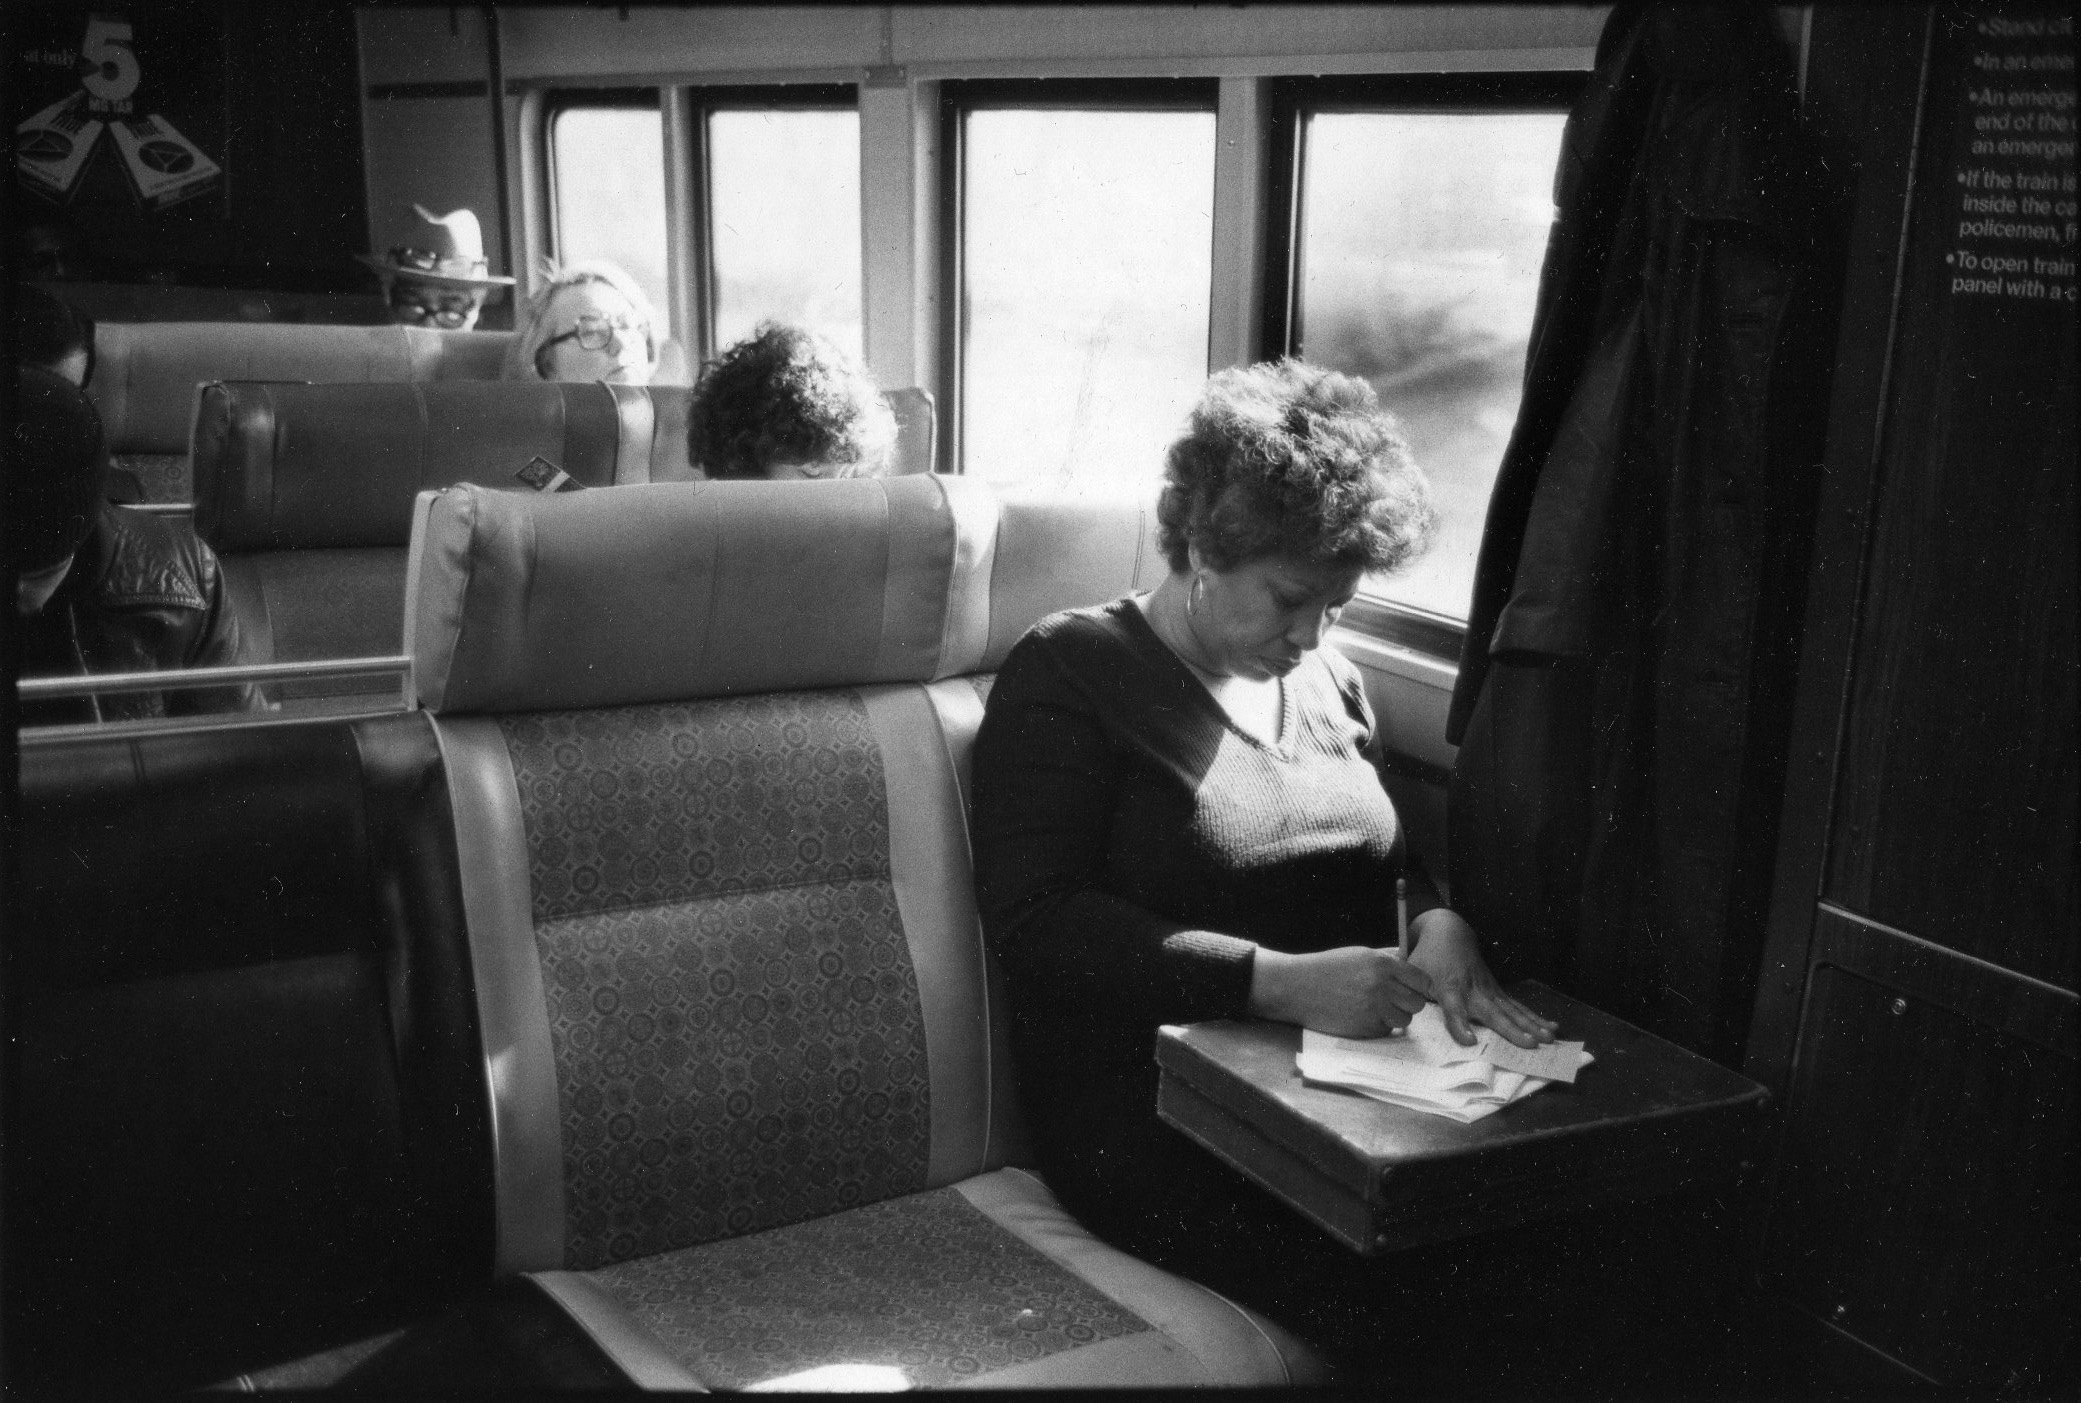 Morrison on her way to Yale University, where she was teaching in the department of African-American studies. (Photograph © by Jill Krementz; All Rights Reserved)